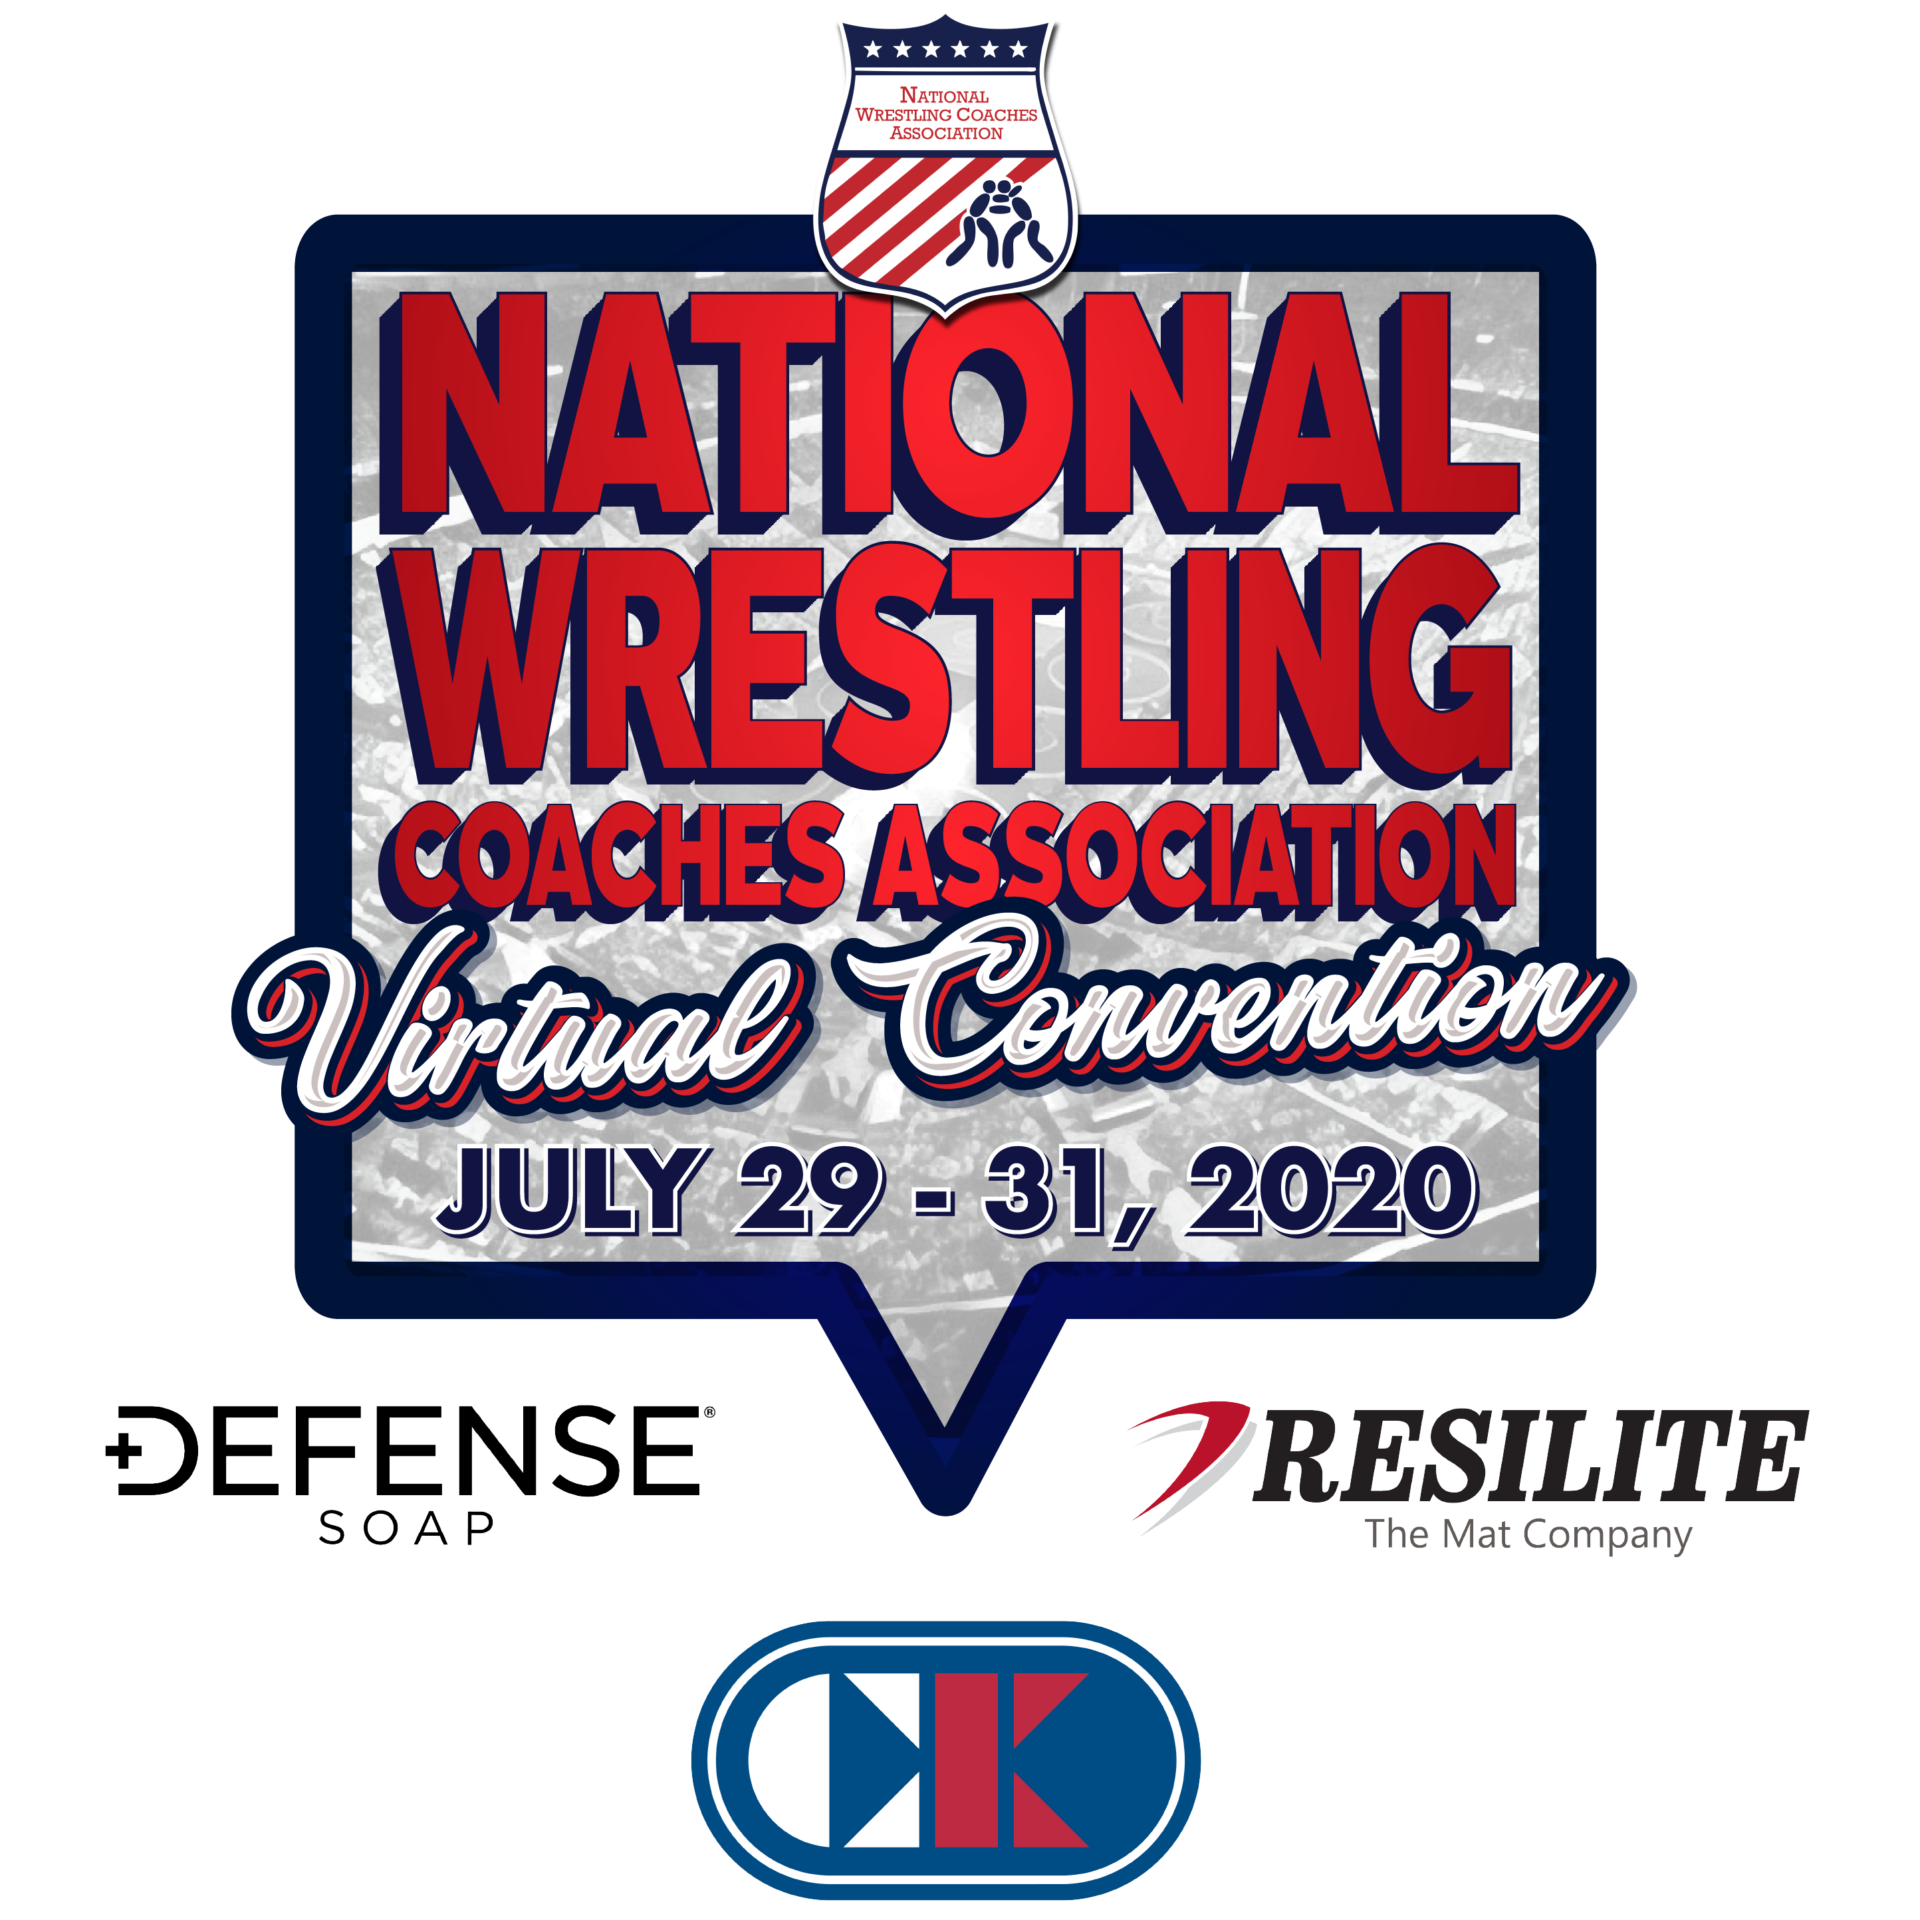 NWCA TO HOST VIRTUAL CONVENTION NWCA